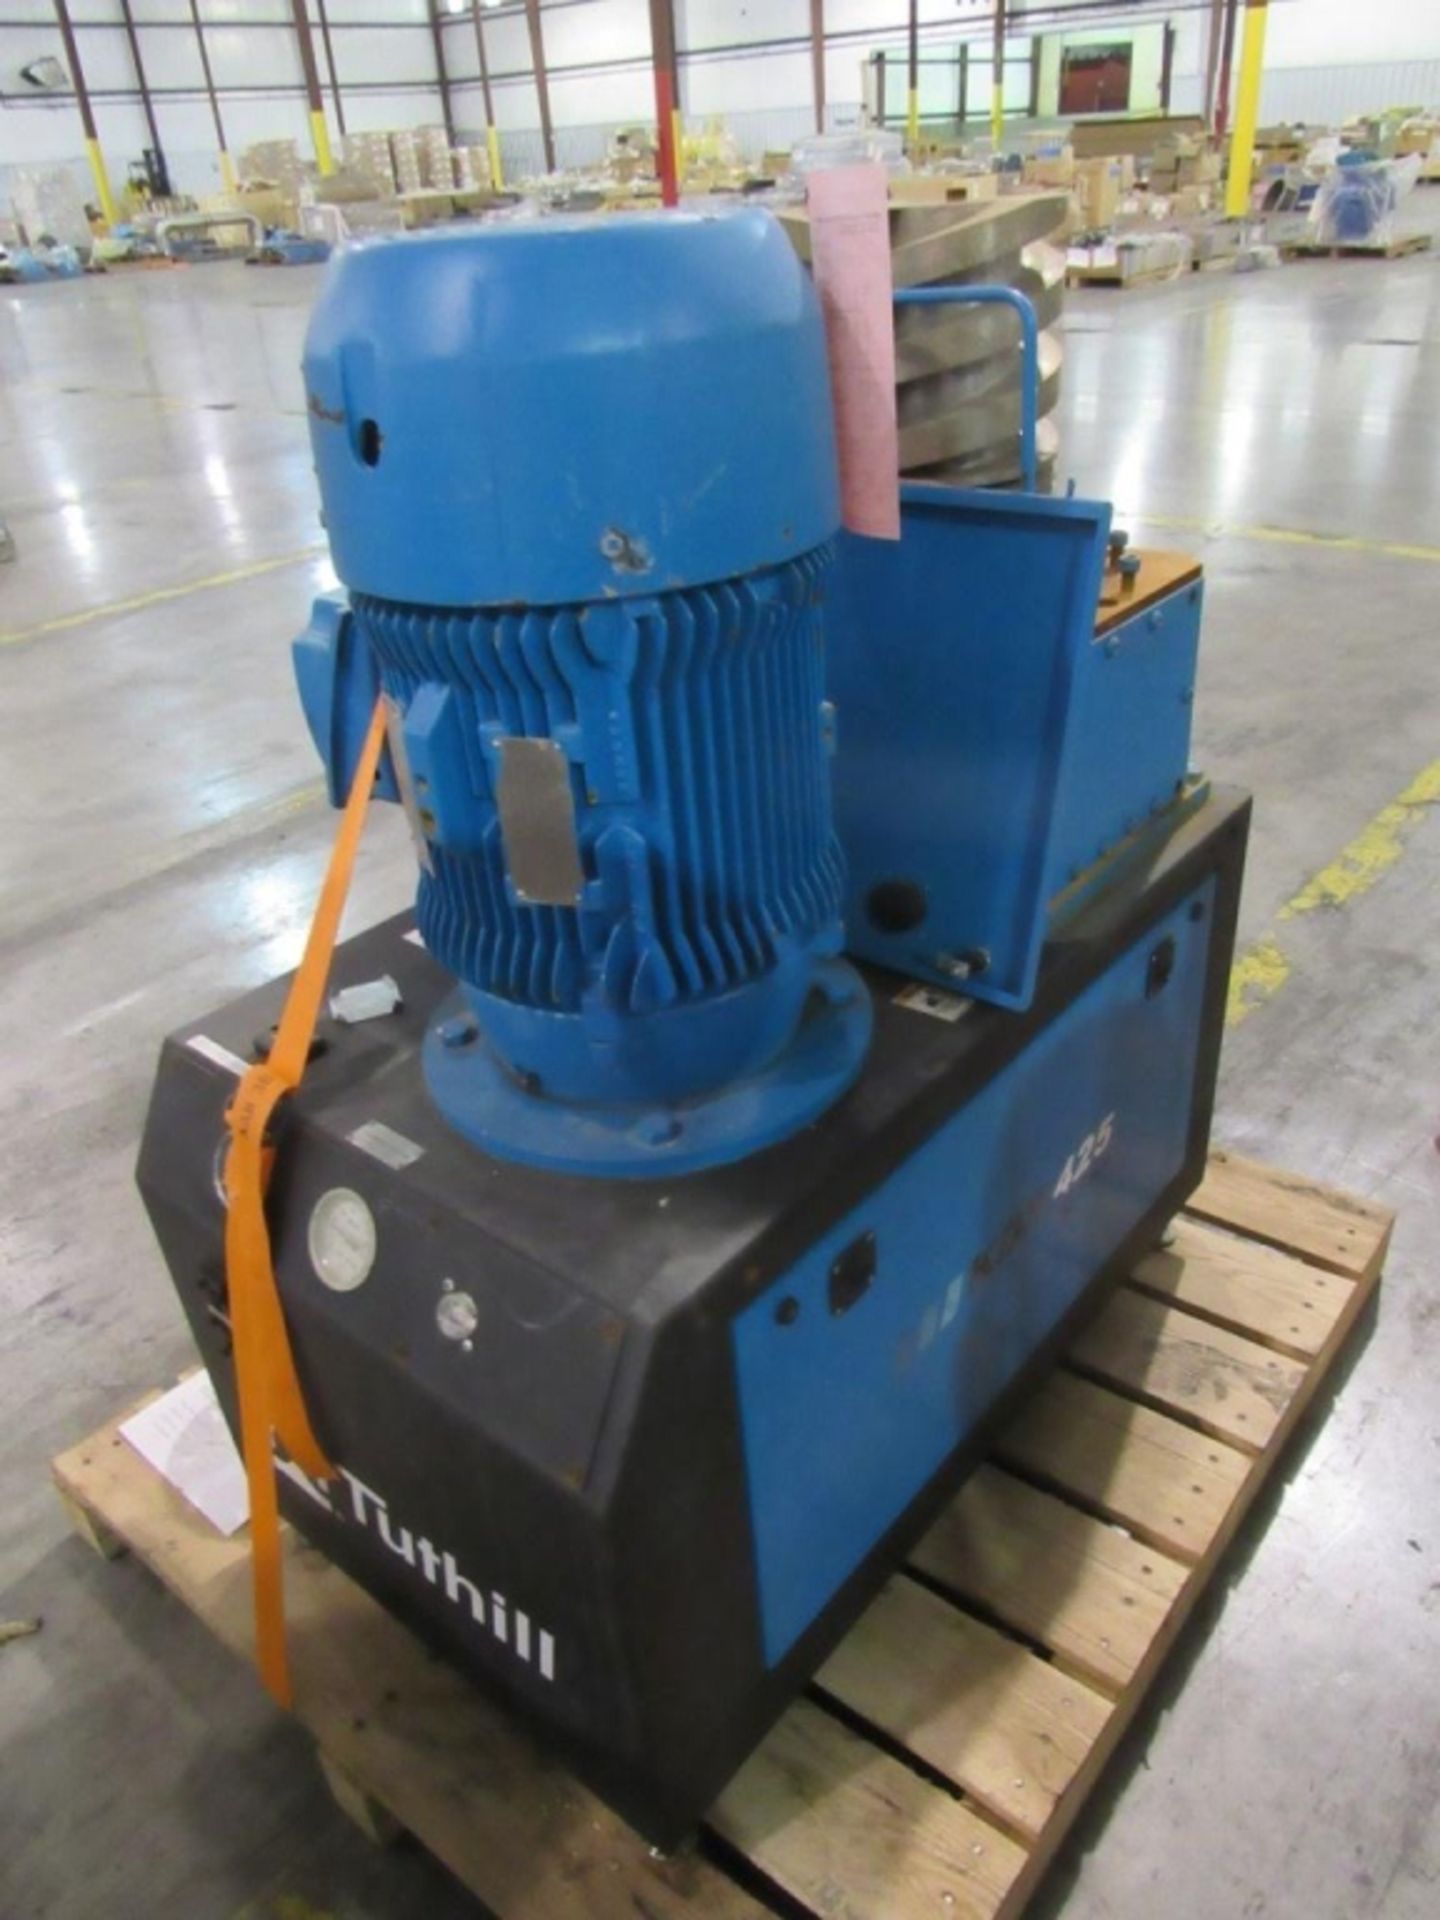 Tuthill KDS 425 Screw Vacuum Pump- ***Located in Cleveland, TN*** MFR - Tuthill Model - KDS 425 - Image 3 of 9